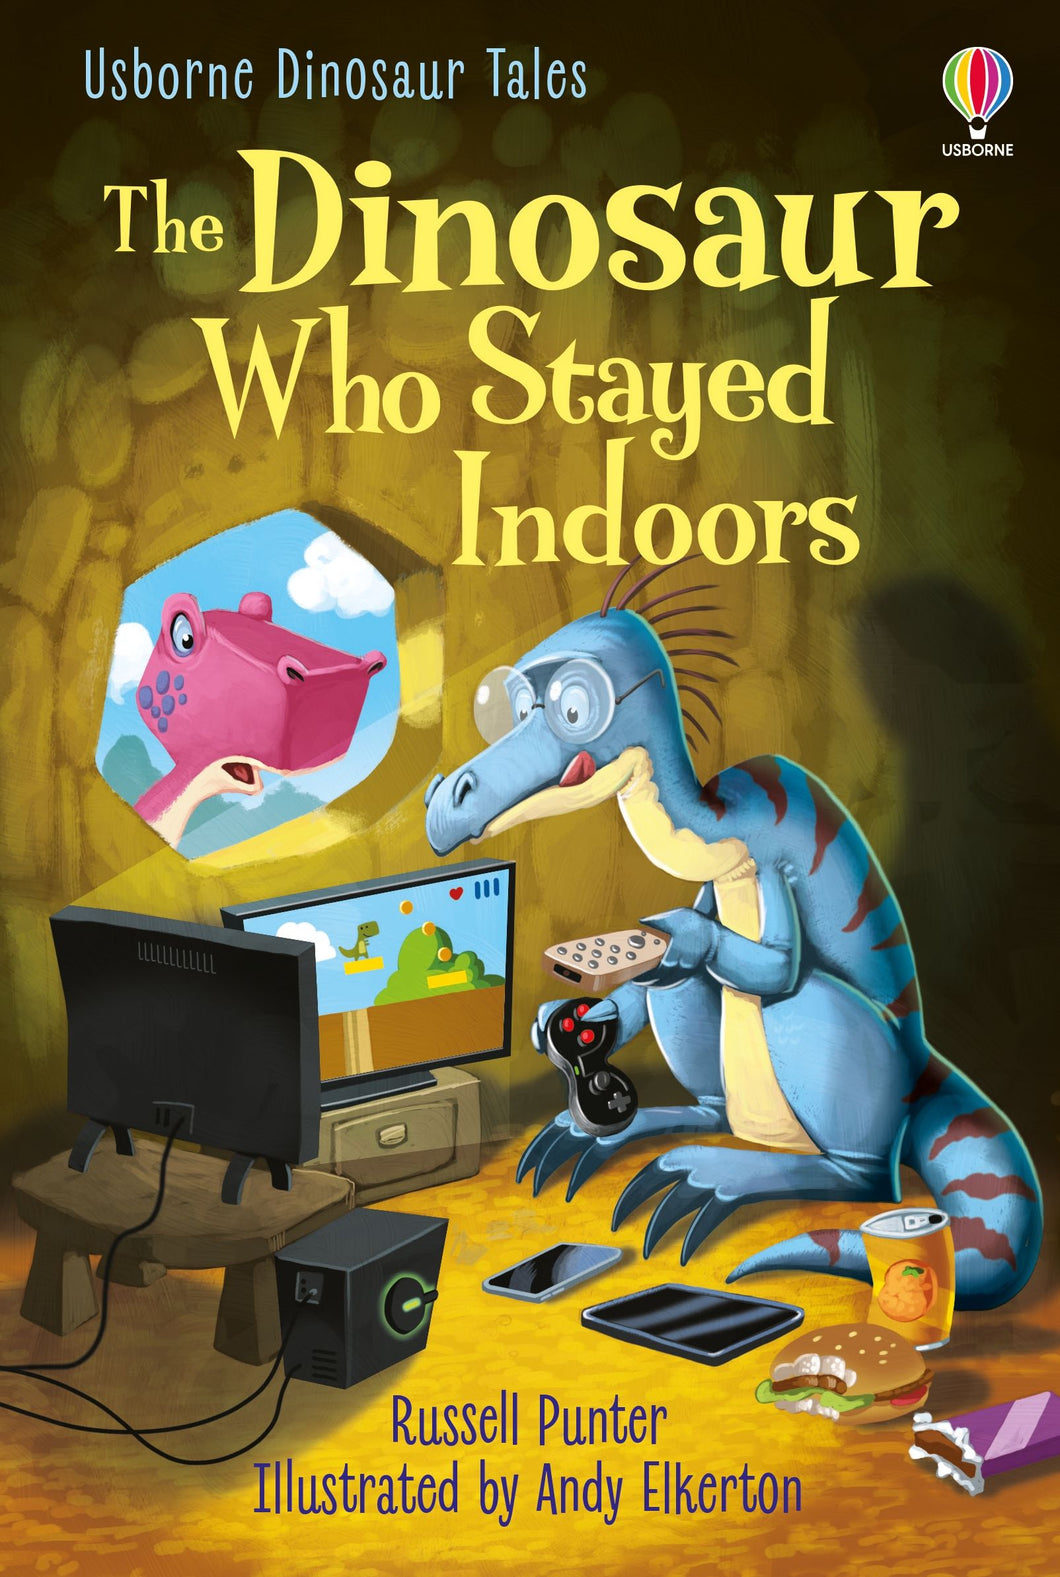 Dinosaur Tales: The Dinosaur who Stayed Indoors